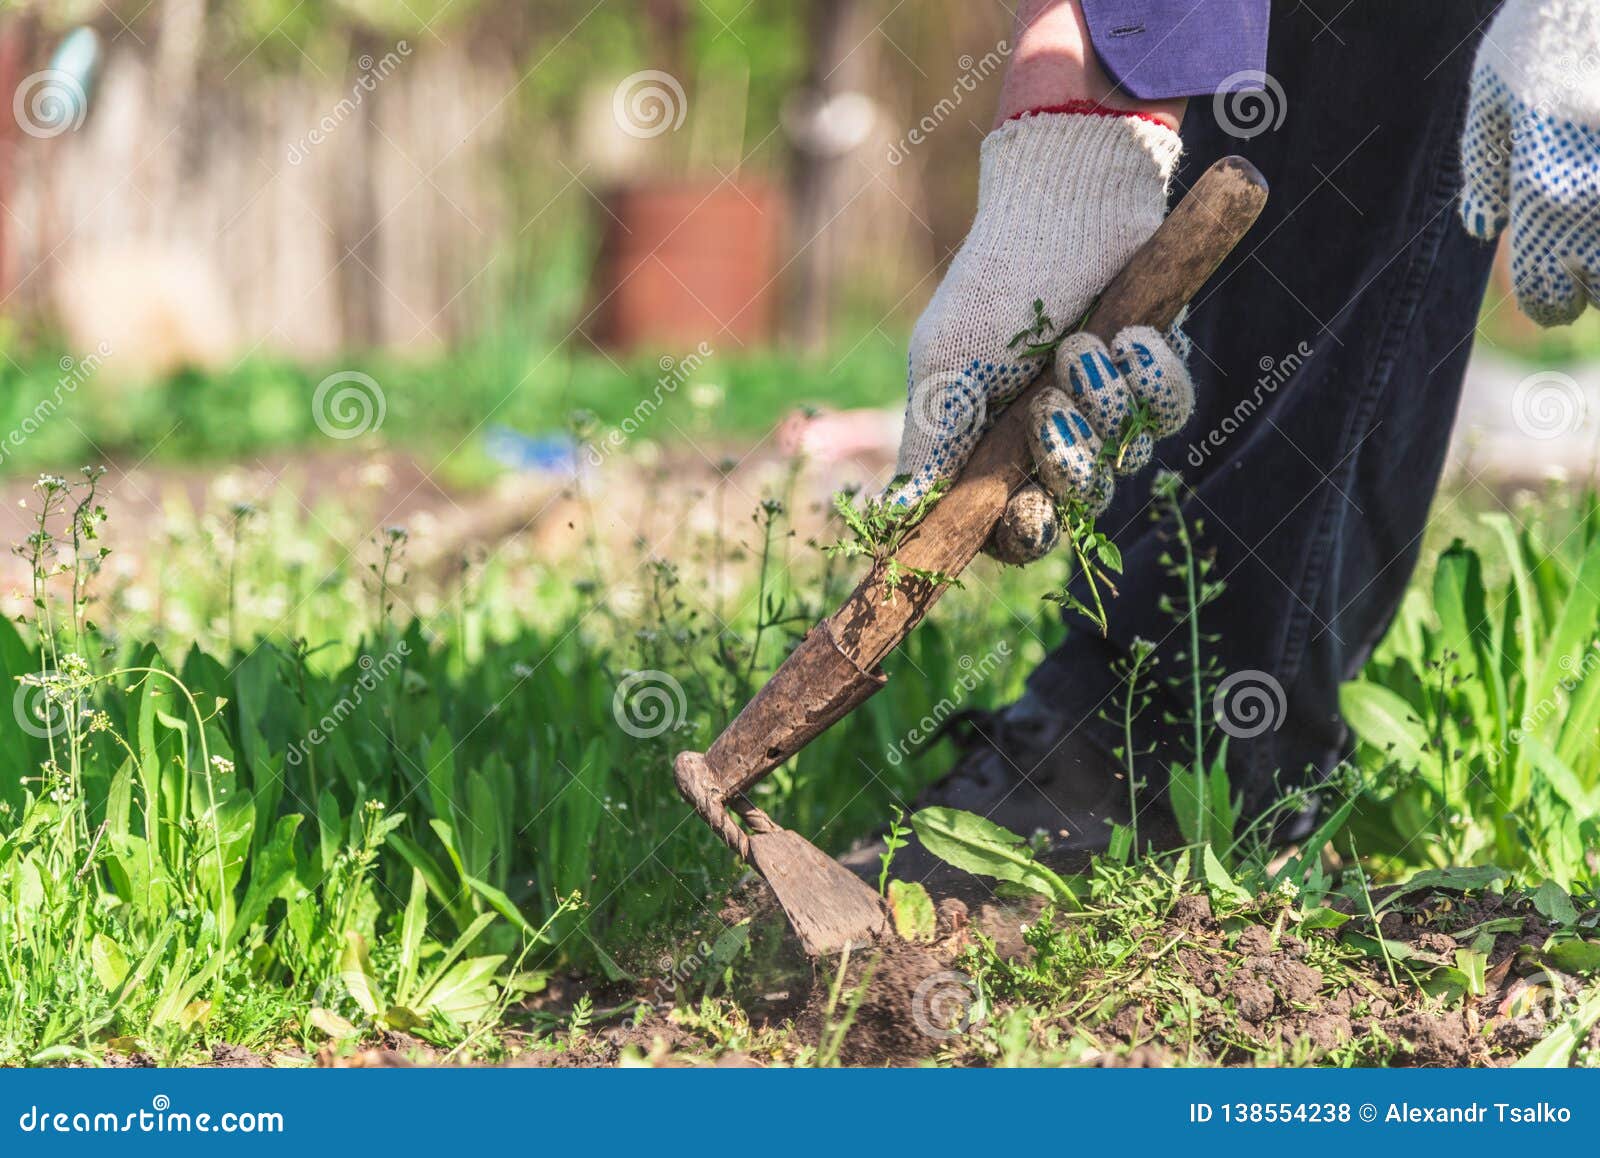 Old Man Uproots Hoe Weeds in His Garden Stock Photo - Image of ...